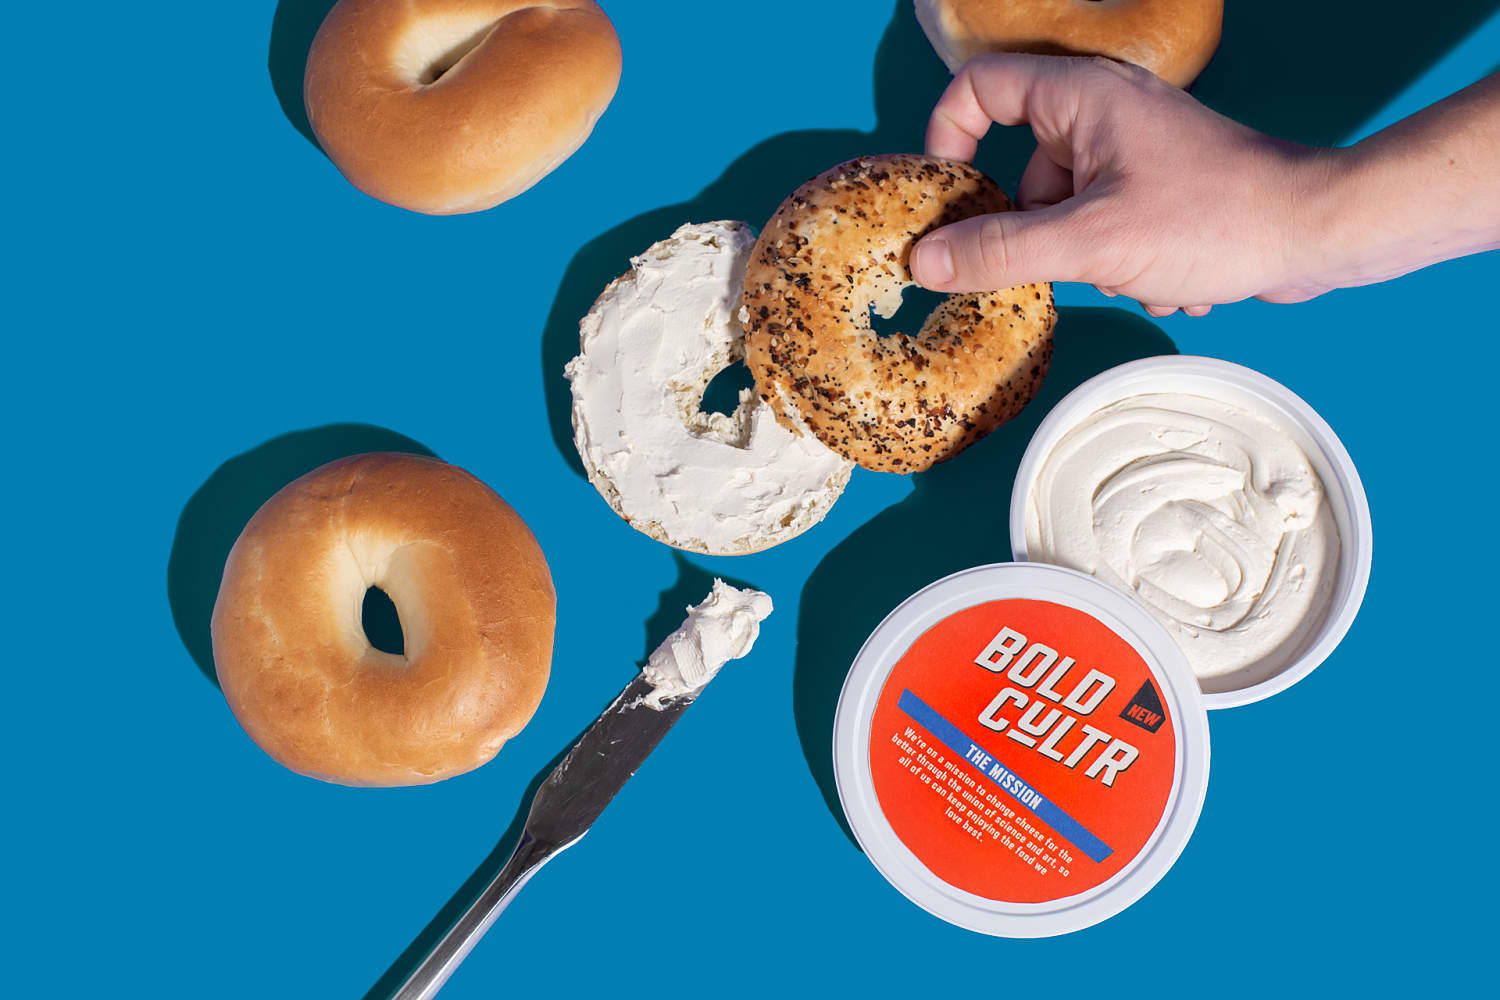 Bold Cultr cream cheese with bagels